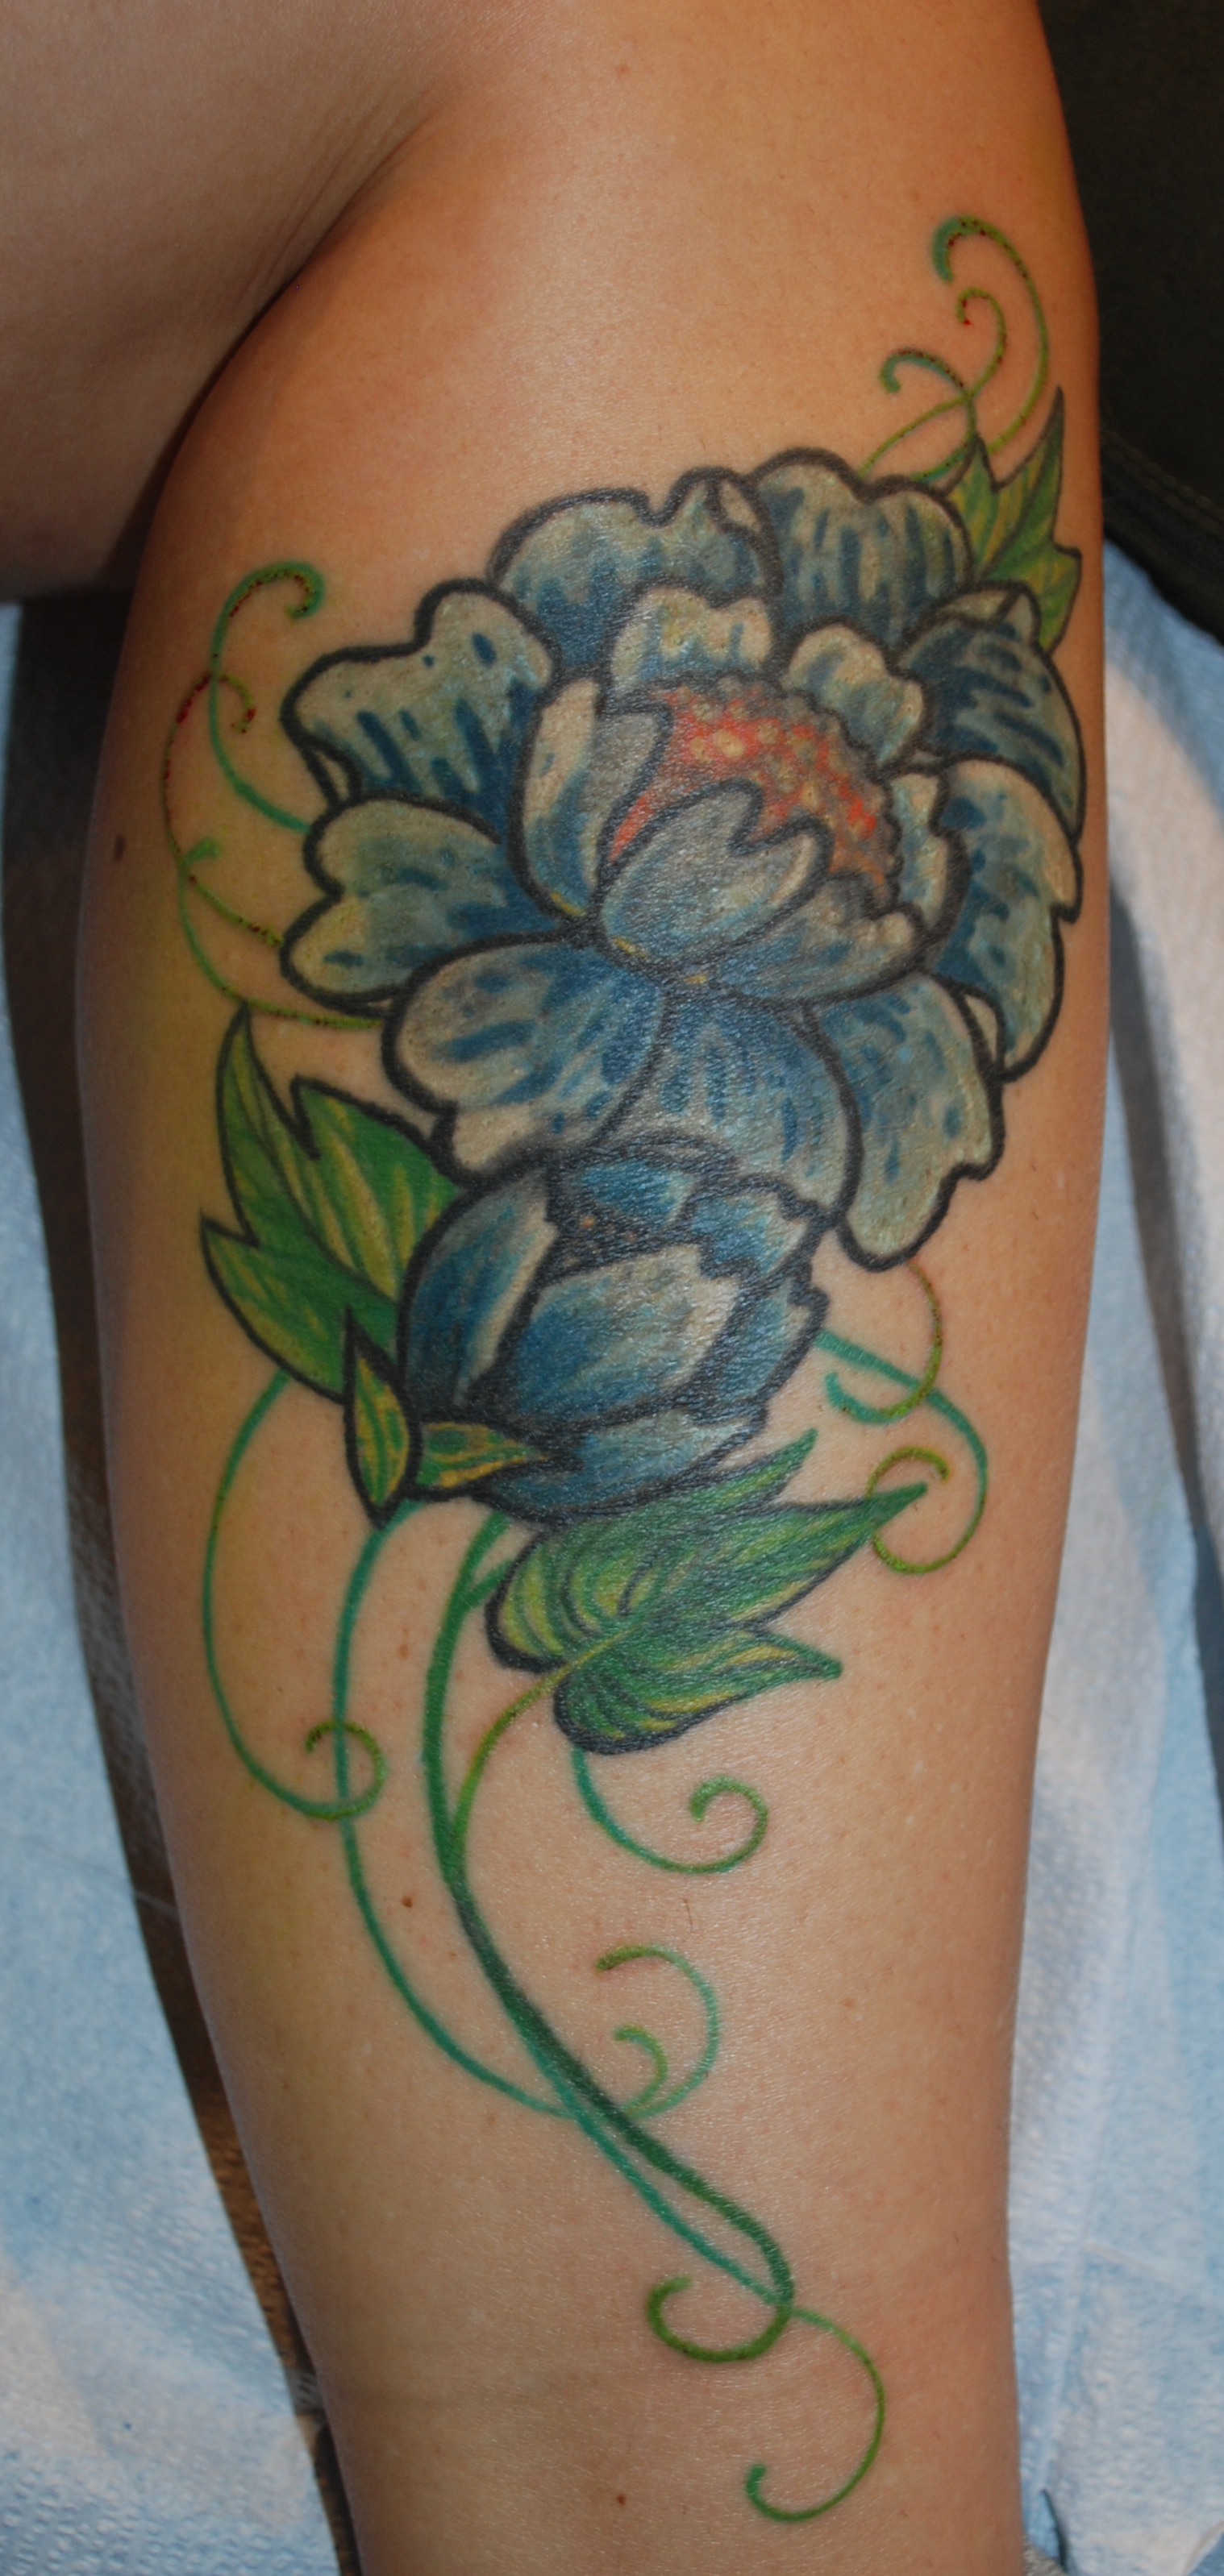 touched up one spot in the light green, the rest is healed!